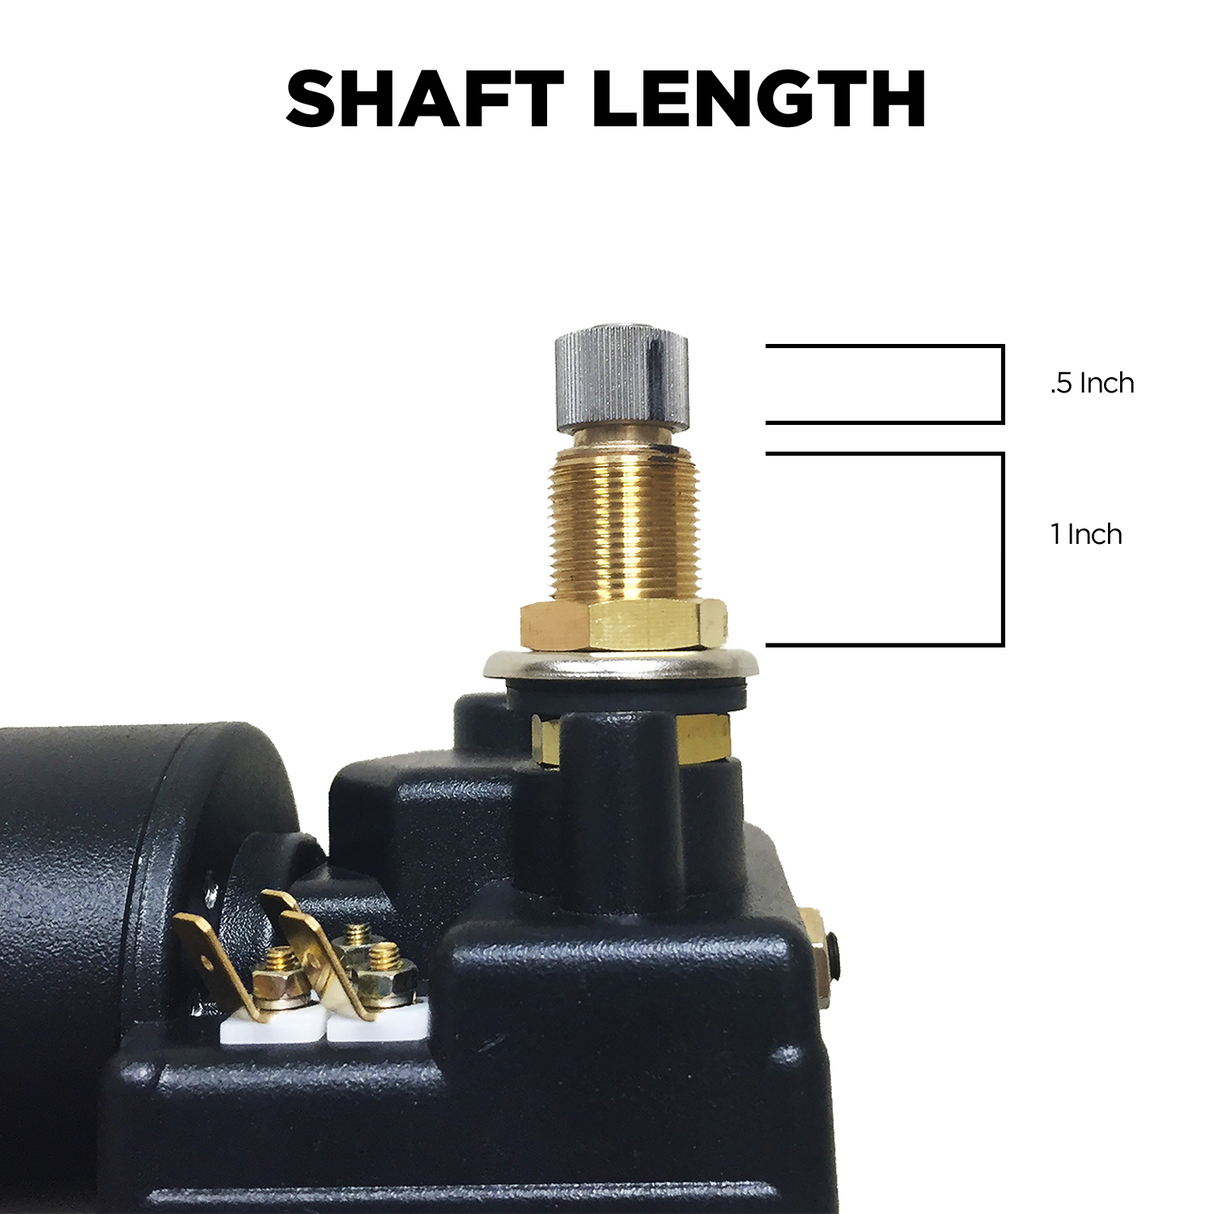 4R1.24-19S2.R110D - One and a half inch (1.5") shaft, 24V With Two-Speed Switch Installed